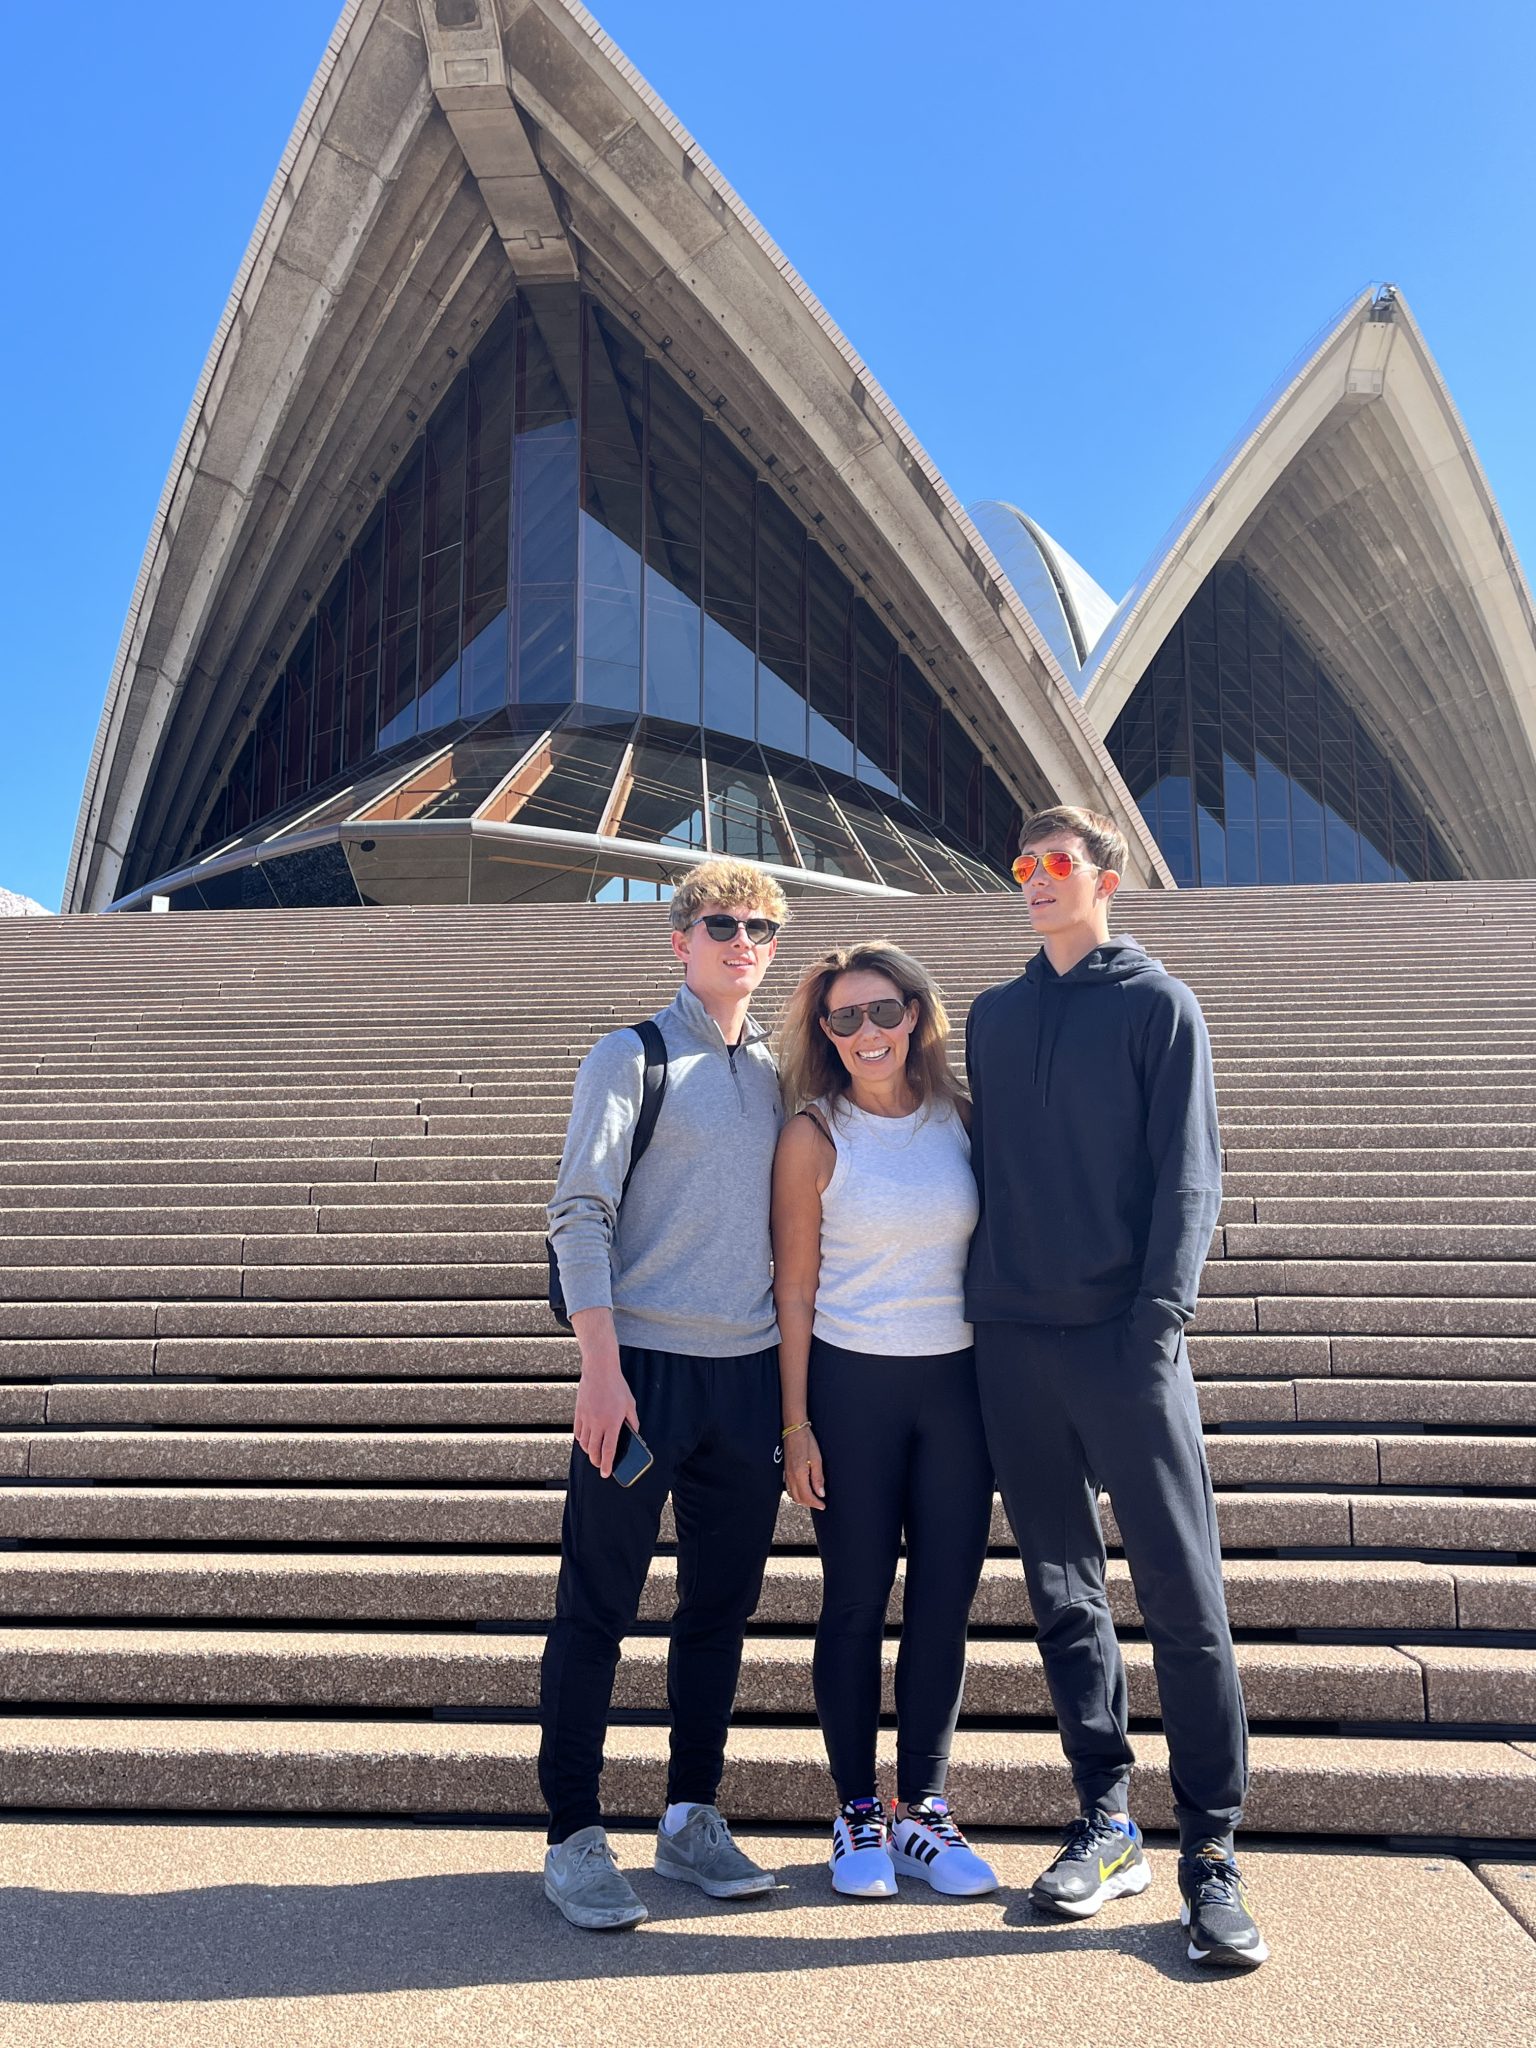 Visit the opera house with a 12 hour layover in Sydney